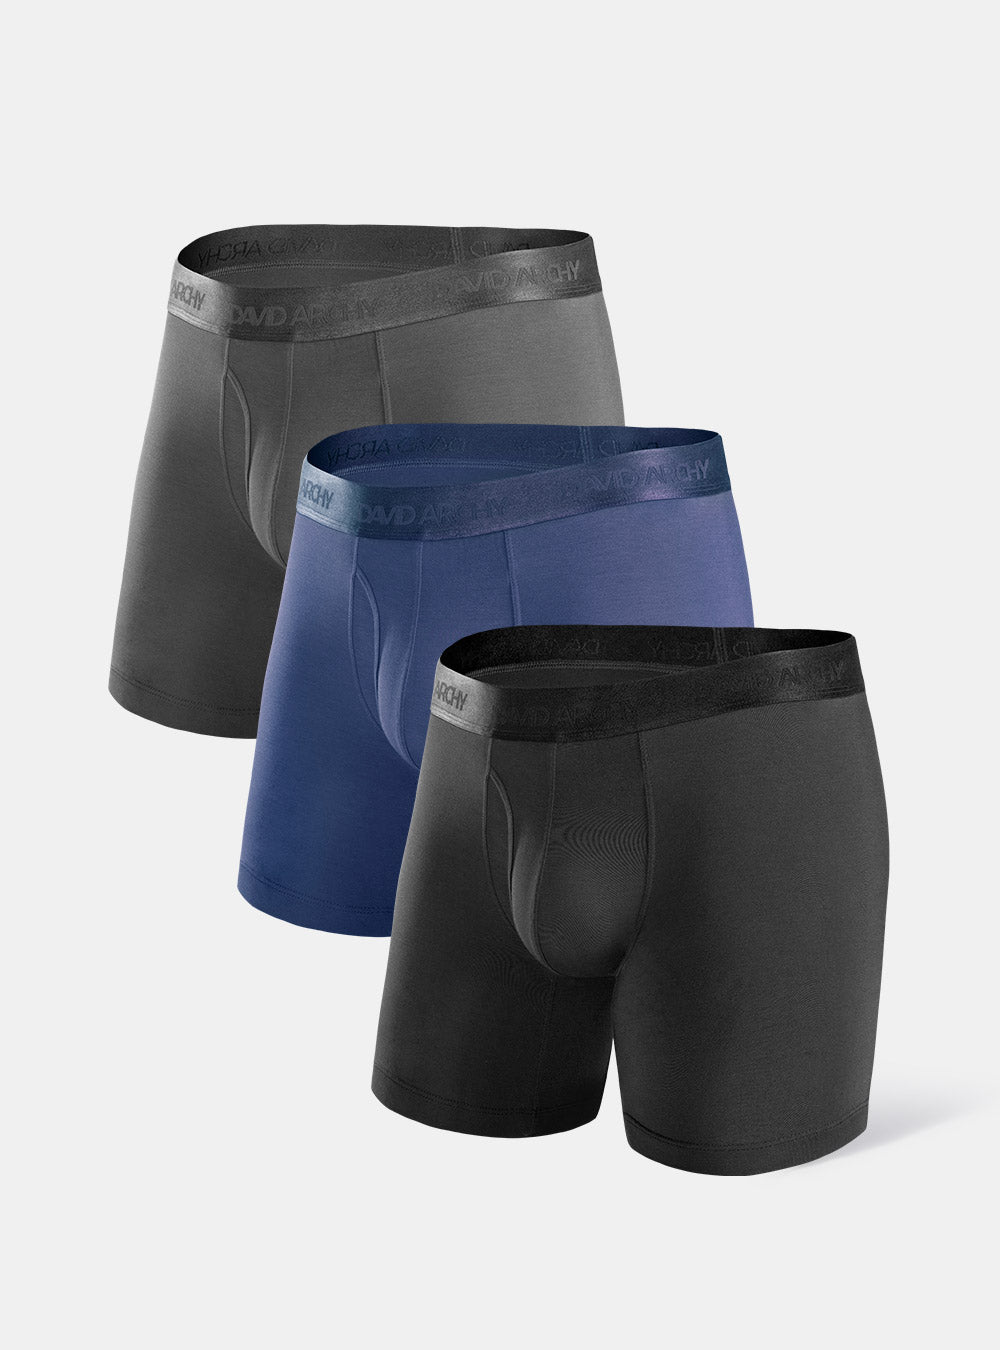 David Archy 3 Packs Boxer Briefs With Fly No-Ride Up Comfy Silky 3D Men's  Underwear